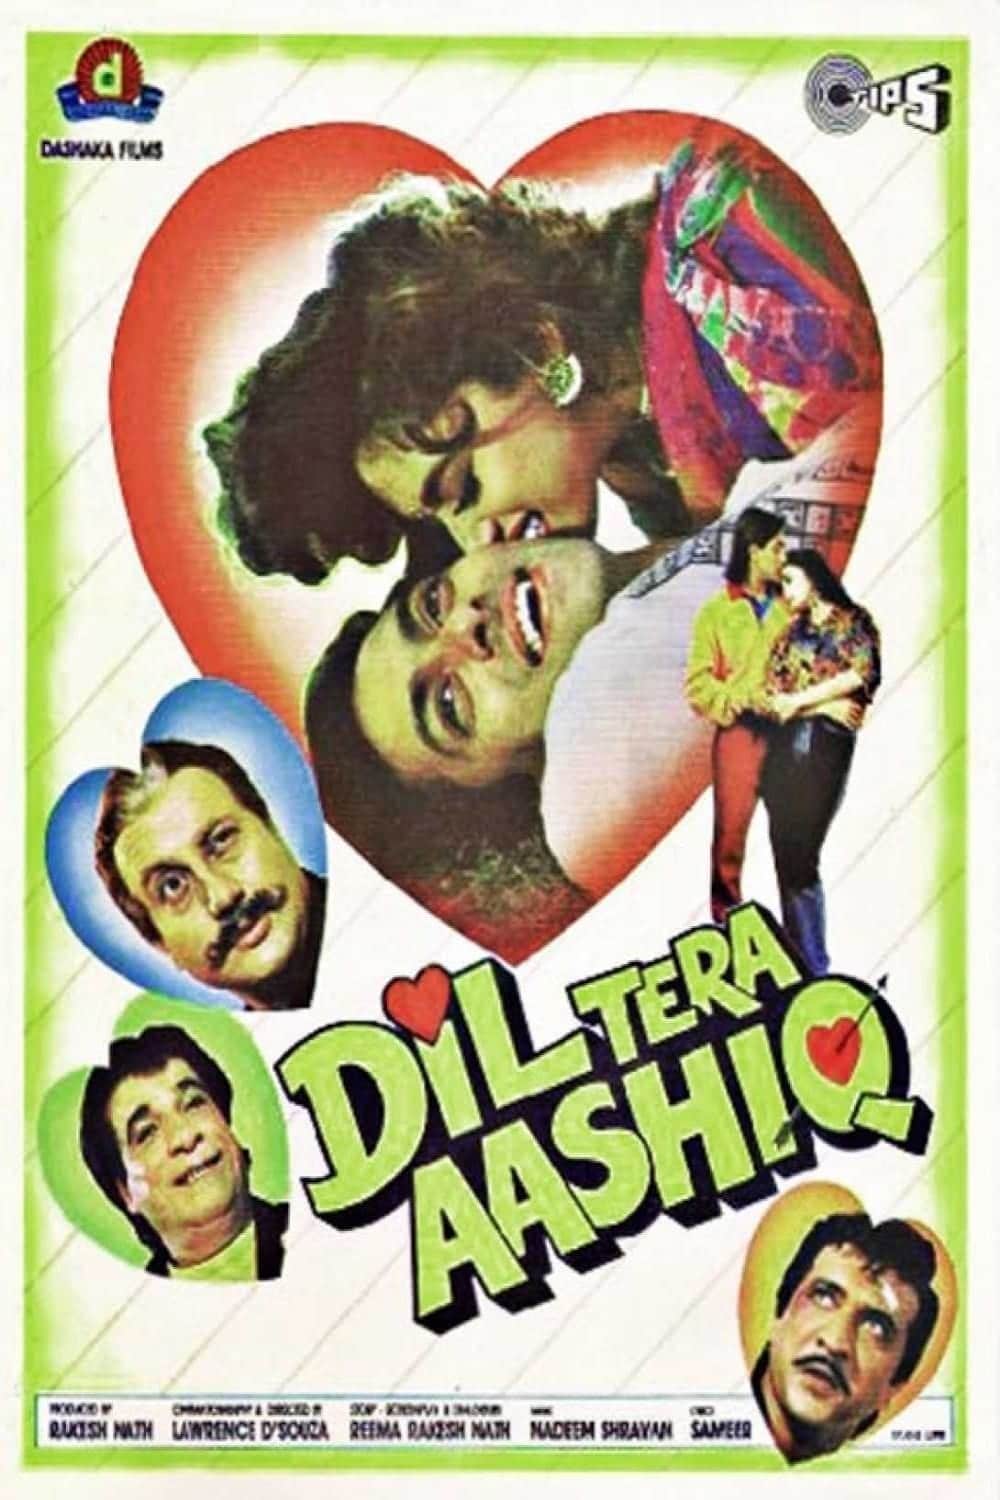 Poster for the movie "Dil Tera Aashiq"